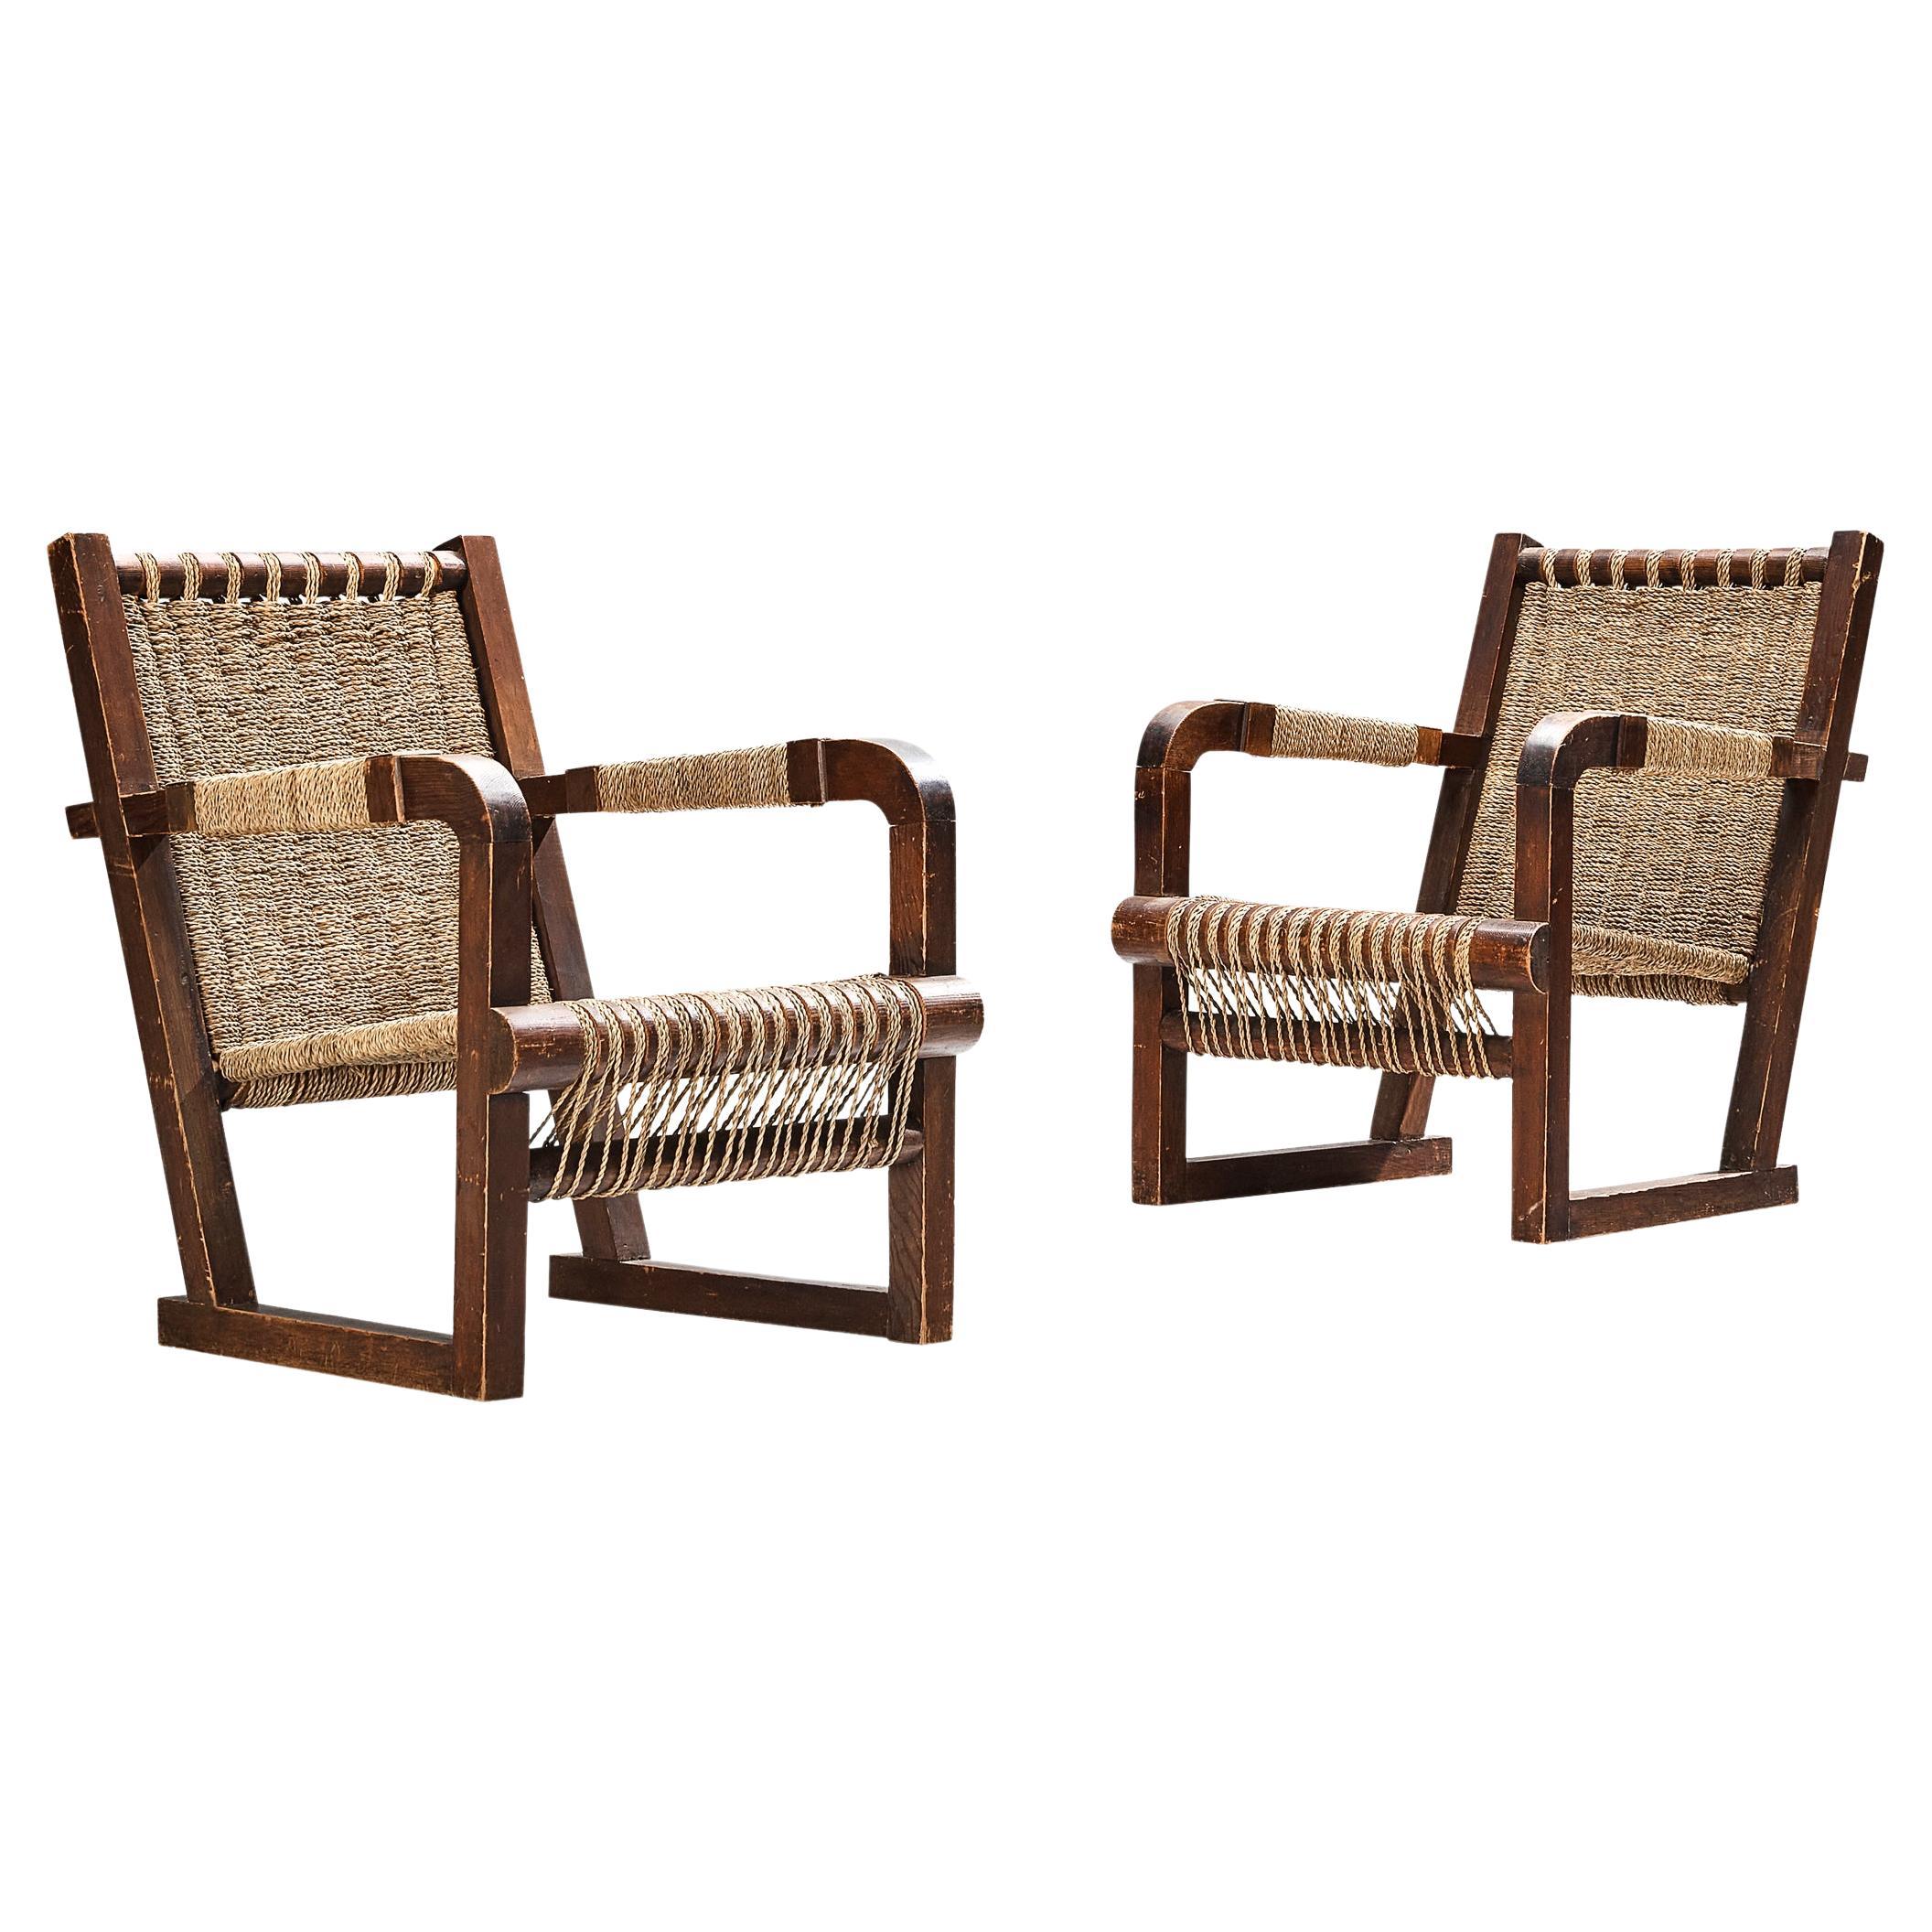 Francis Jourdain Pair of Lounge Chairs with Woven Details